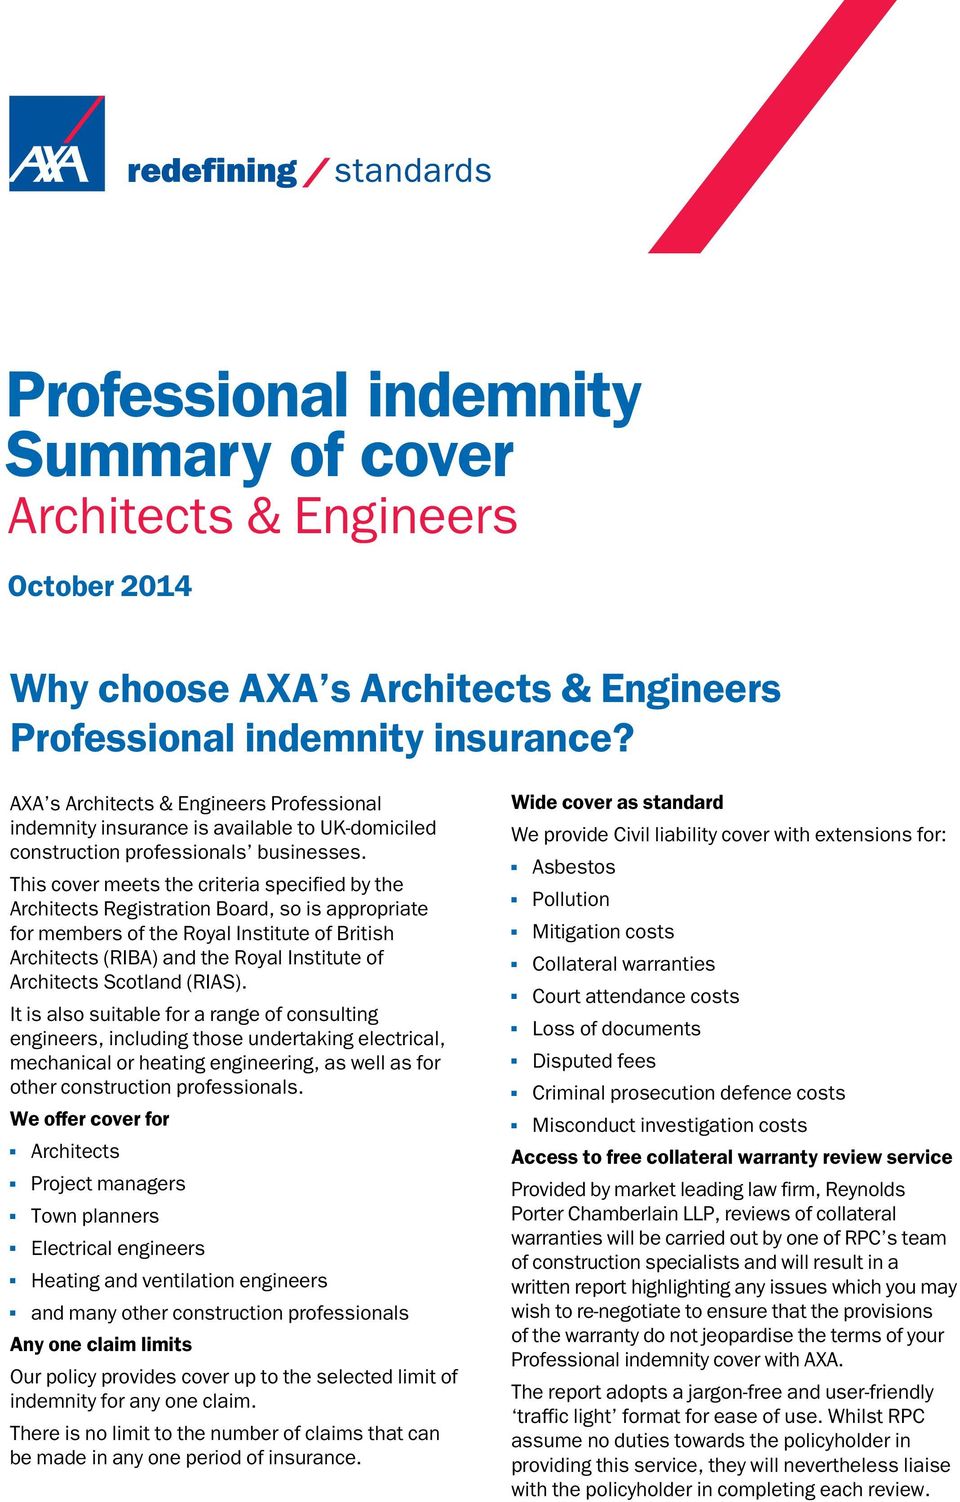 This cover meets the criteria specified by the Architects Registration Board, so is appropriate for members of the Royal Institute of British Architects (RIBA) and the Royal Institute of Architects